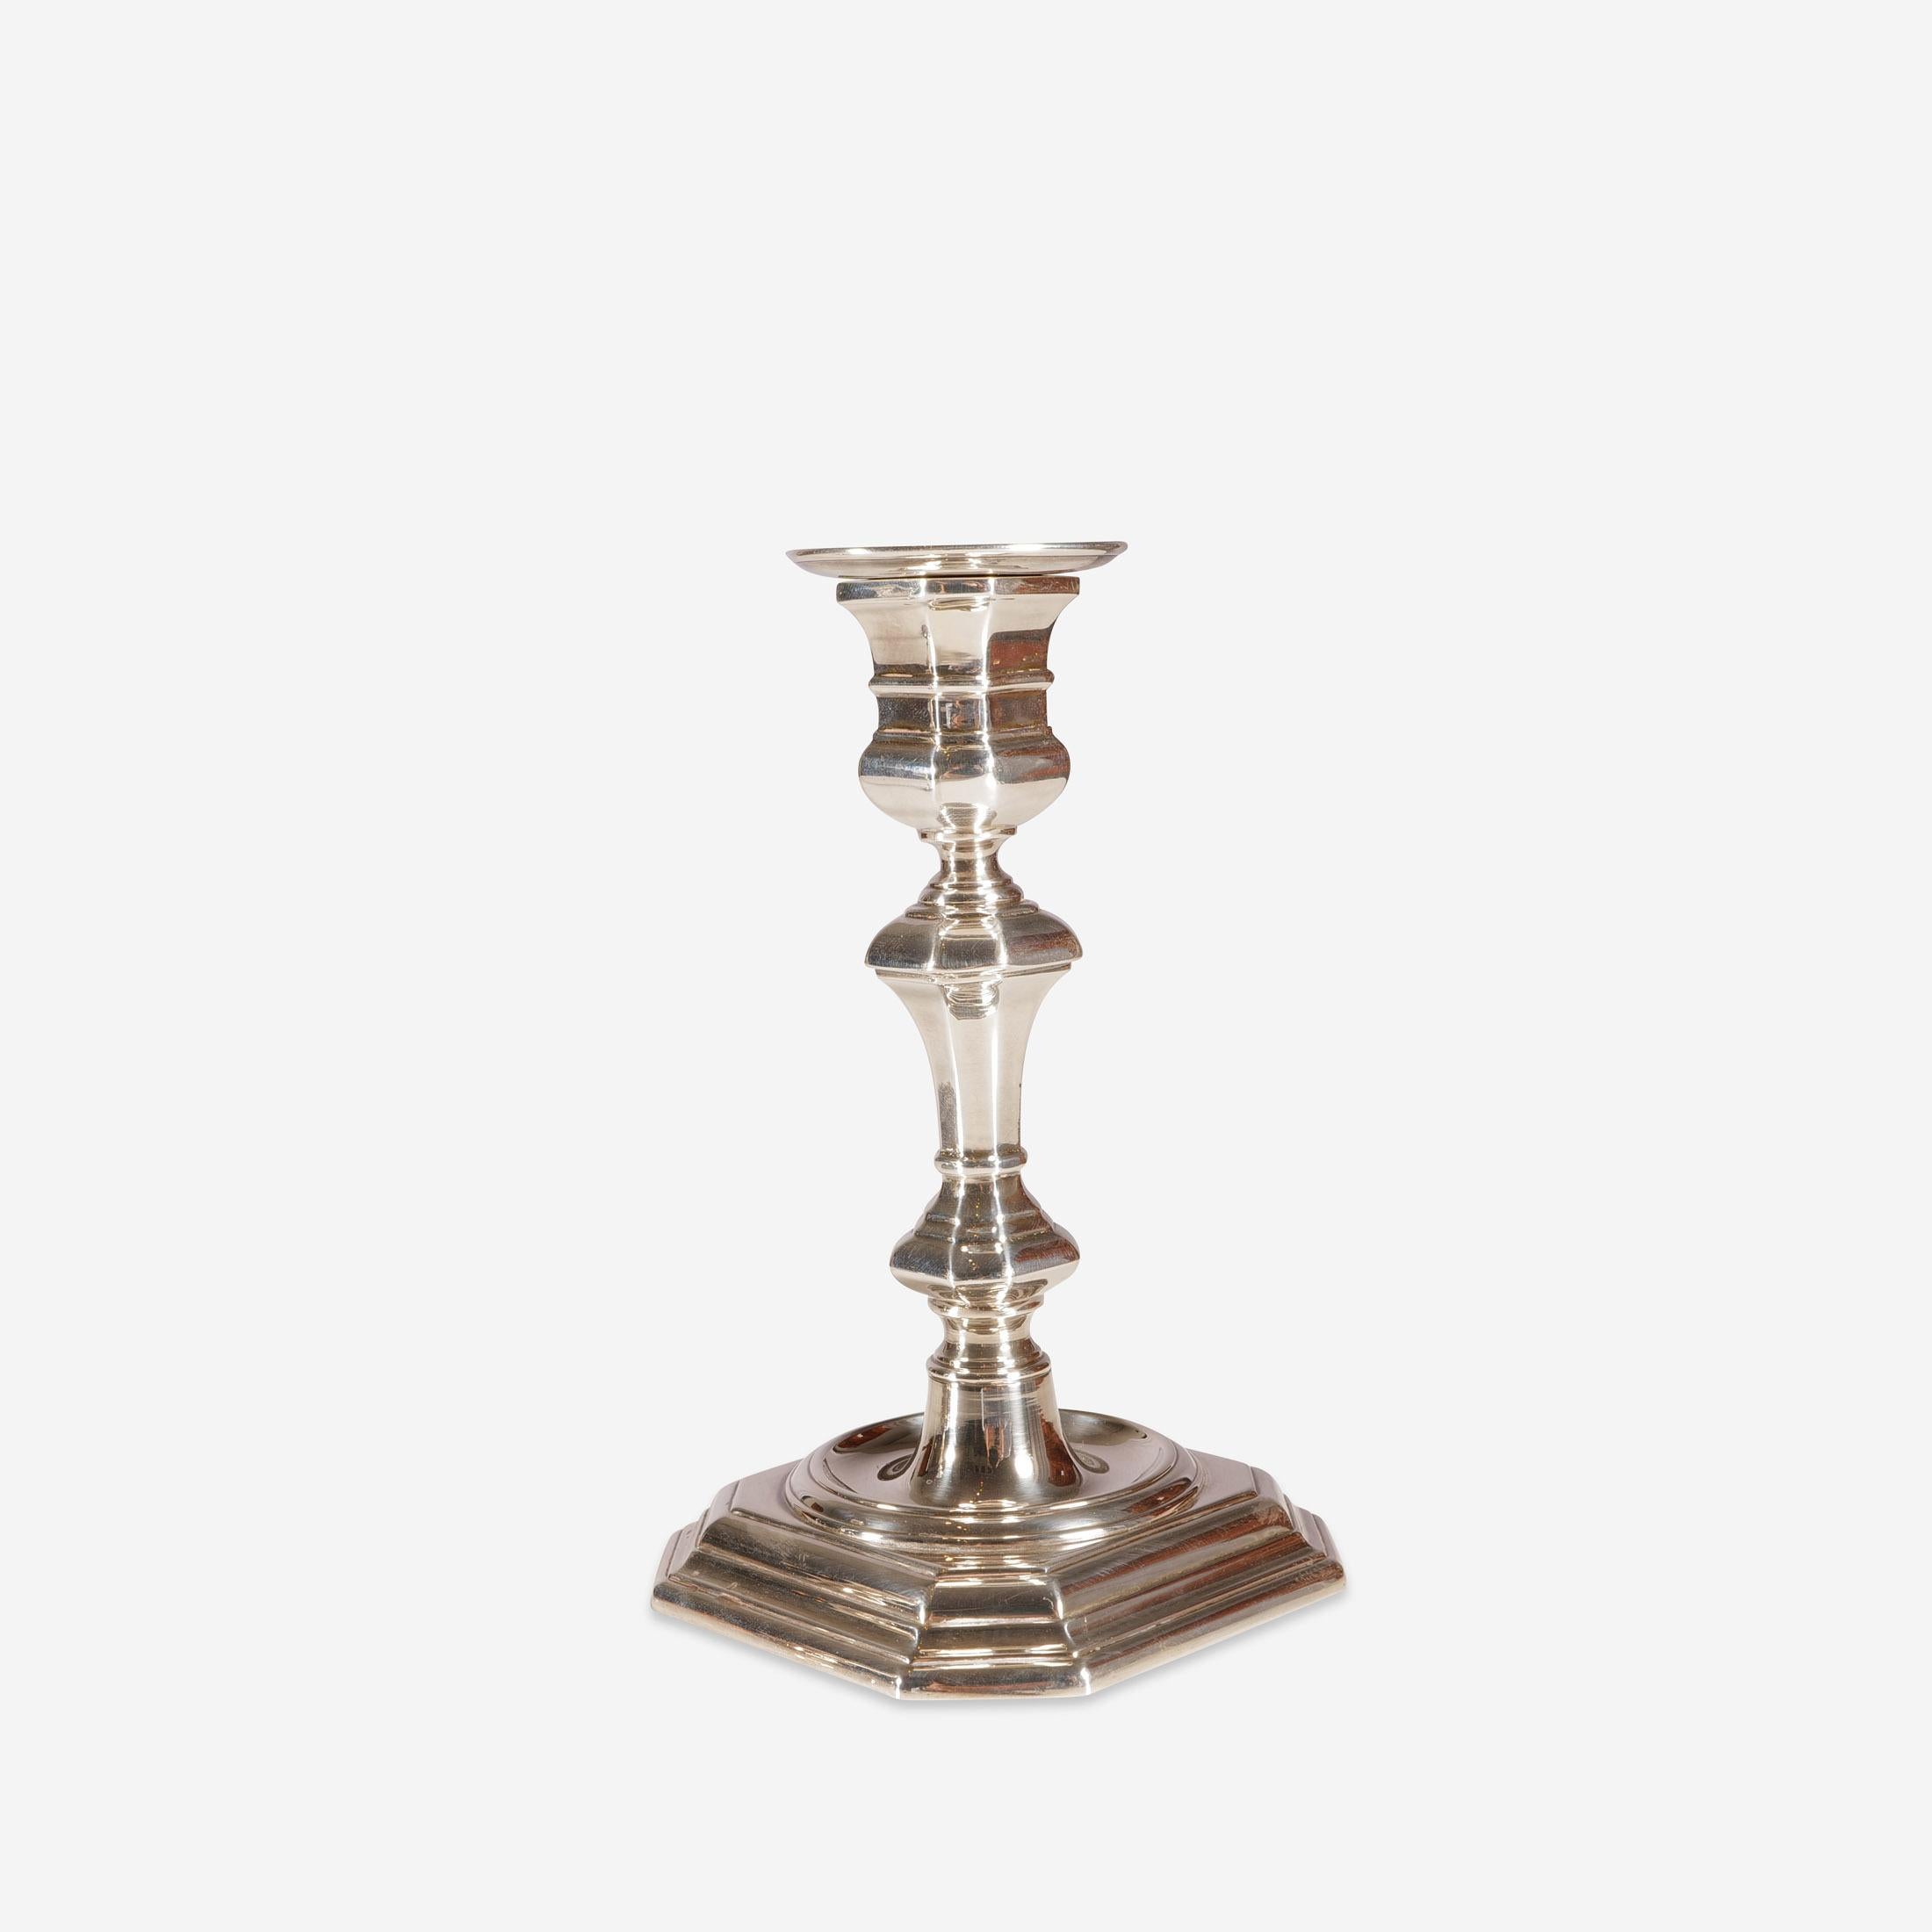 Pair of candlesticks, 800/- silver, octagonal stand, Baroque style, early 20th century.

Height 16 cm, foot 9 x 9 cm